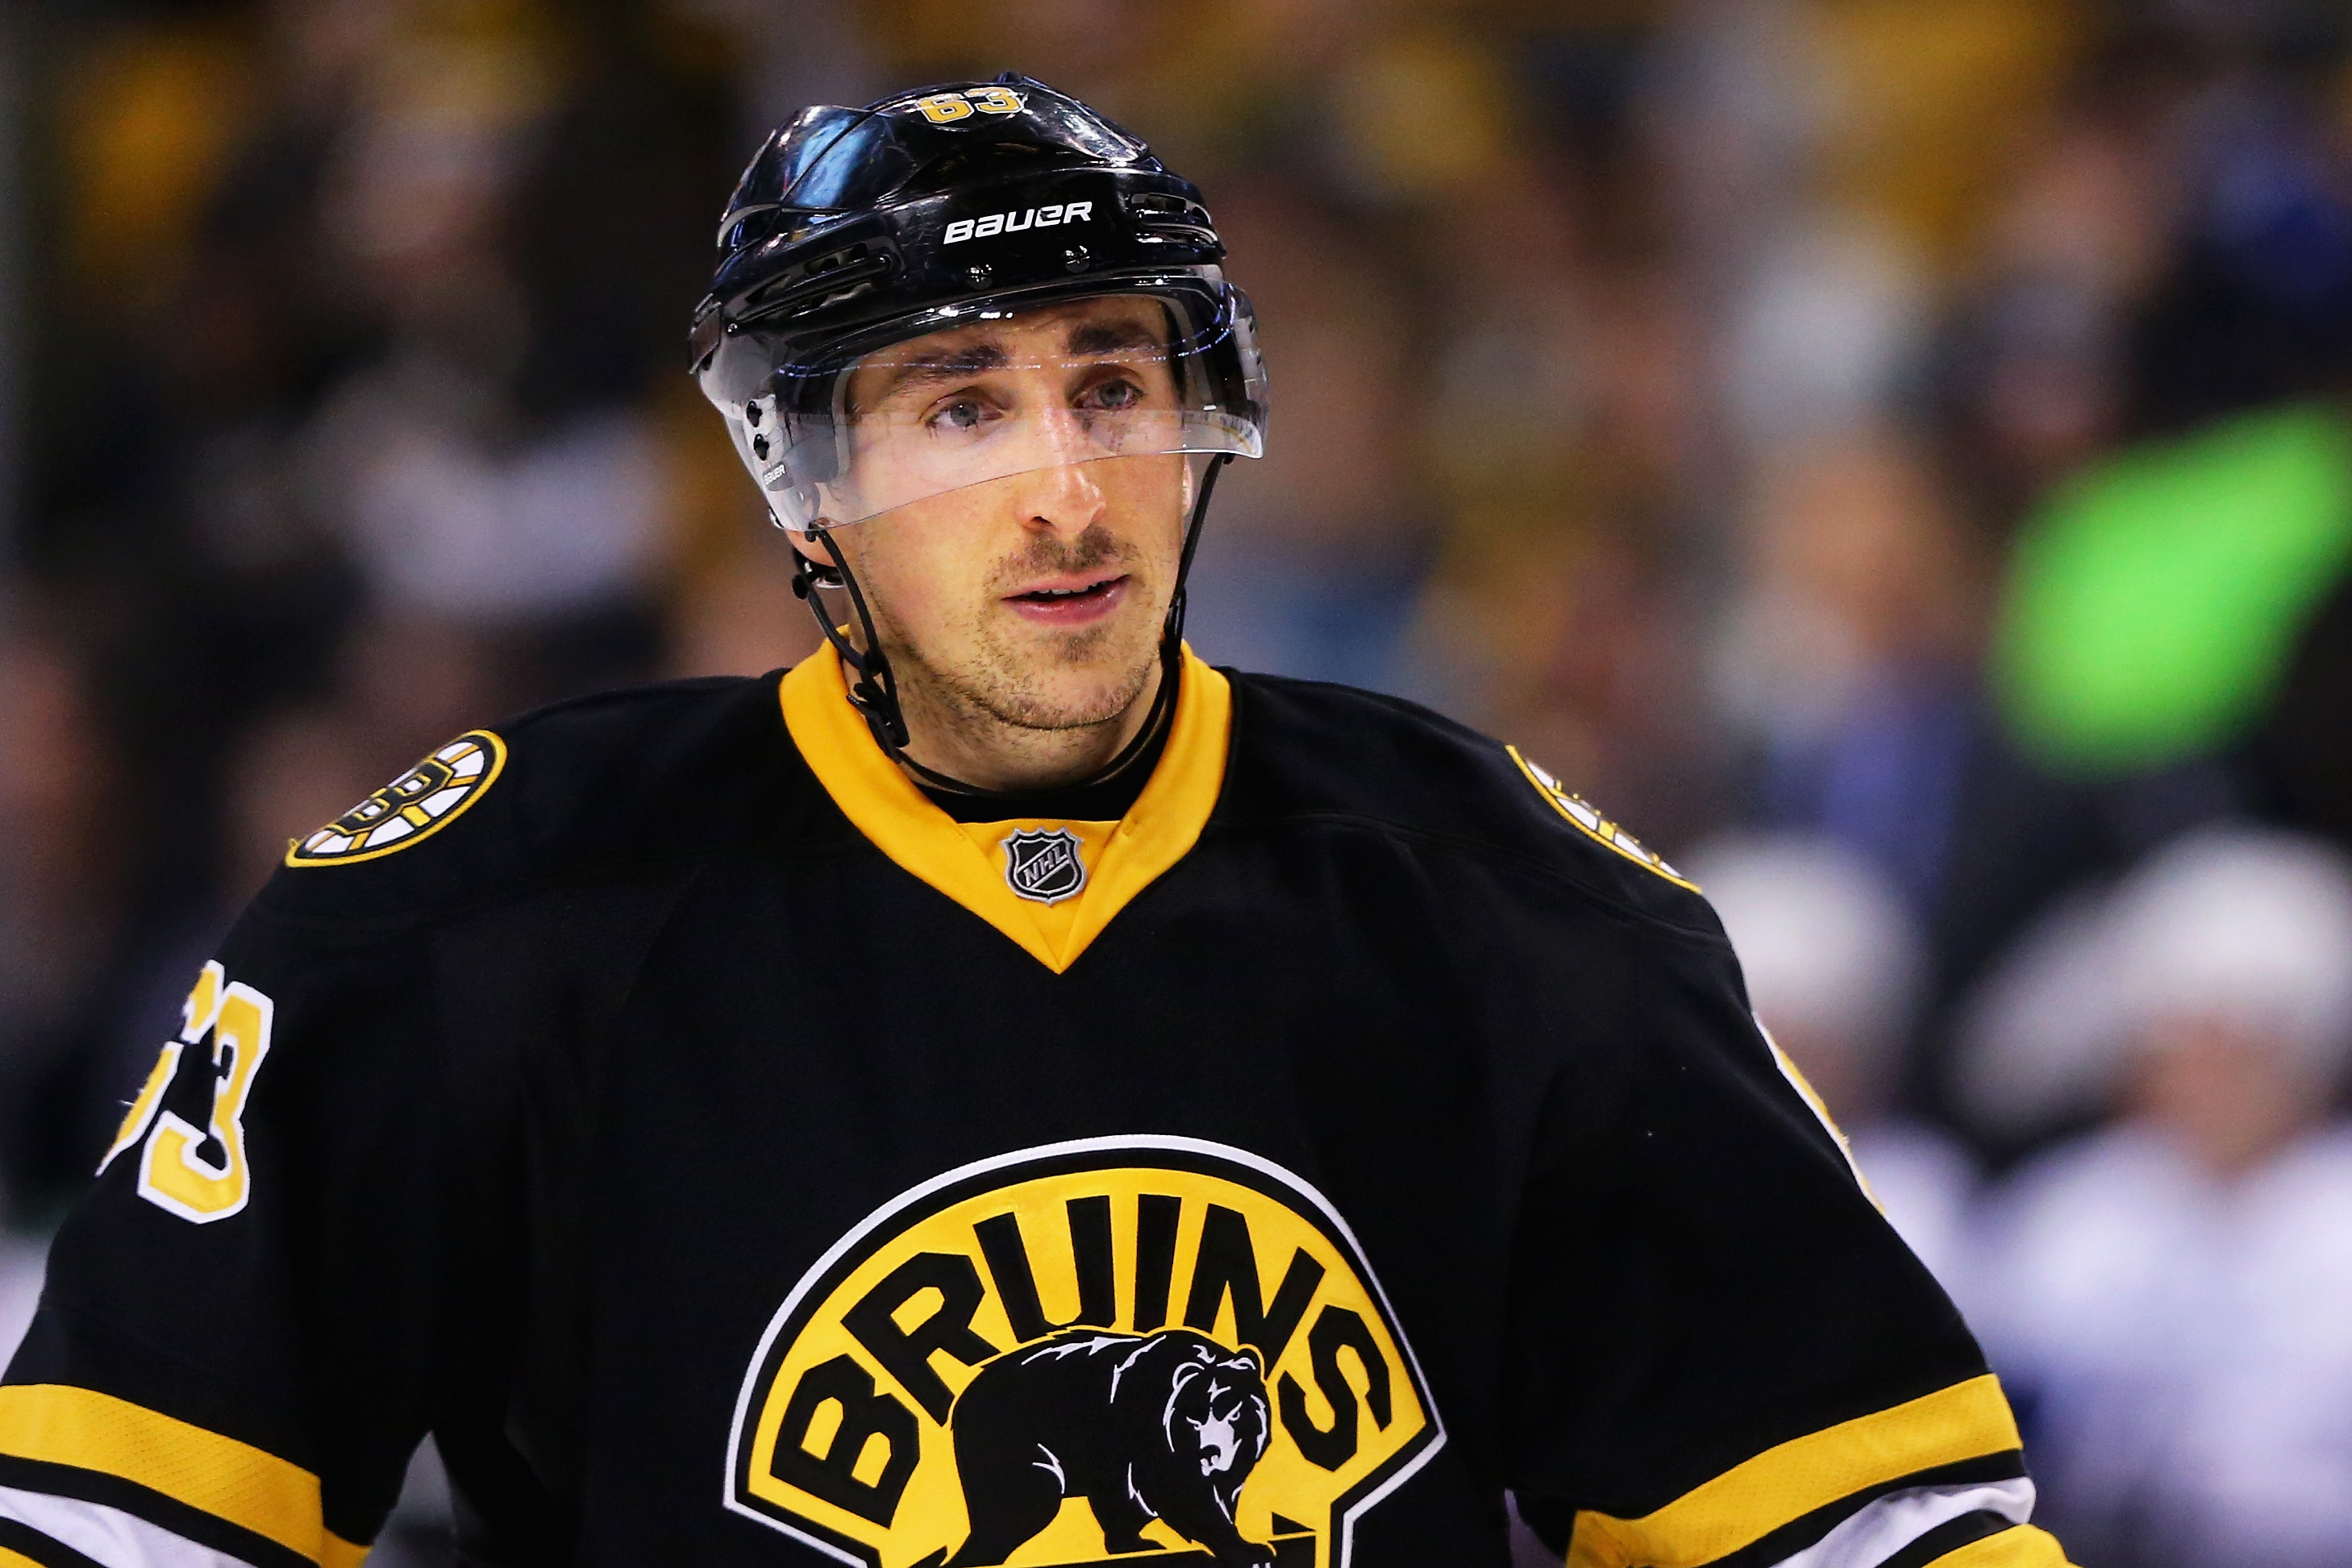 Katrina Sloane Is Hockey Star Brad Marchand's Wife - Facts about